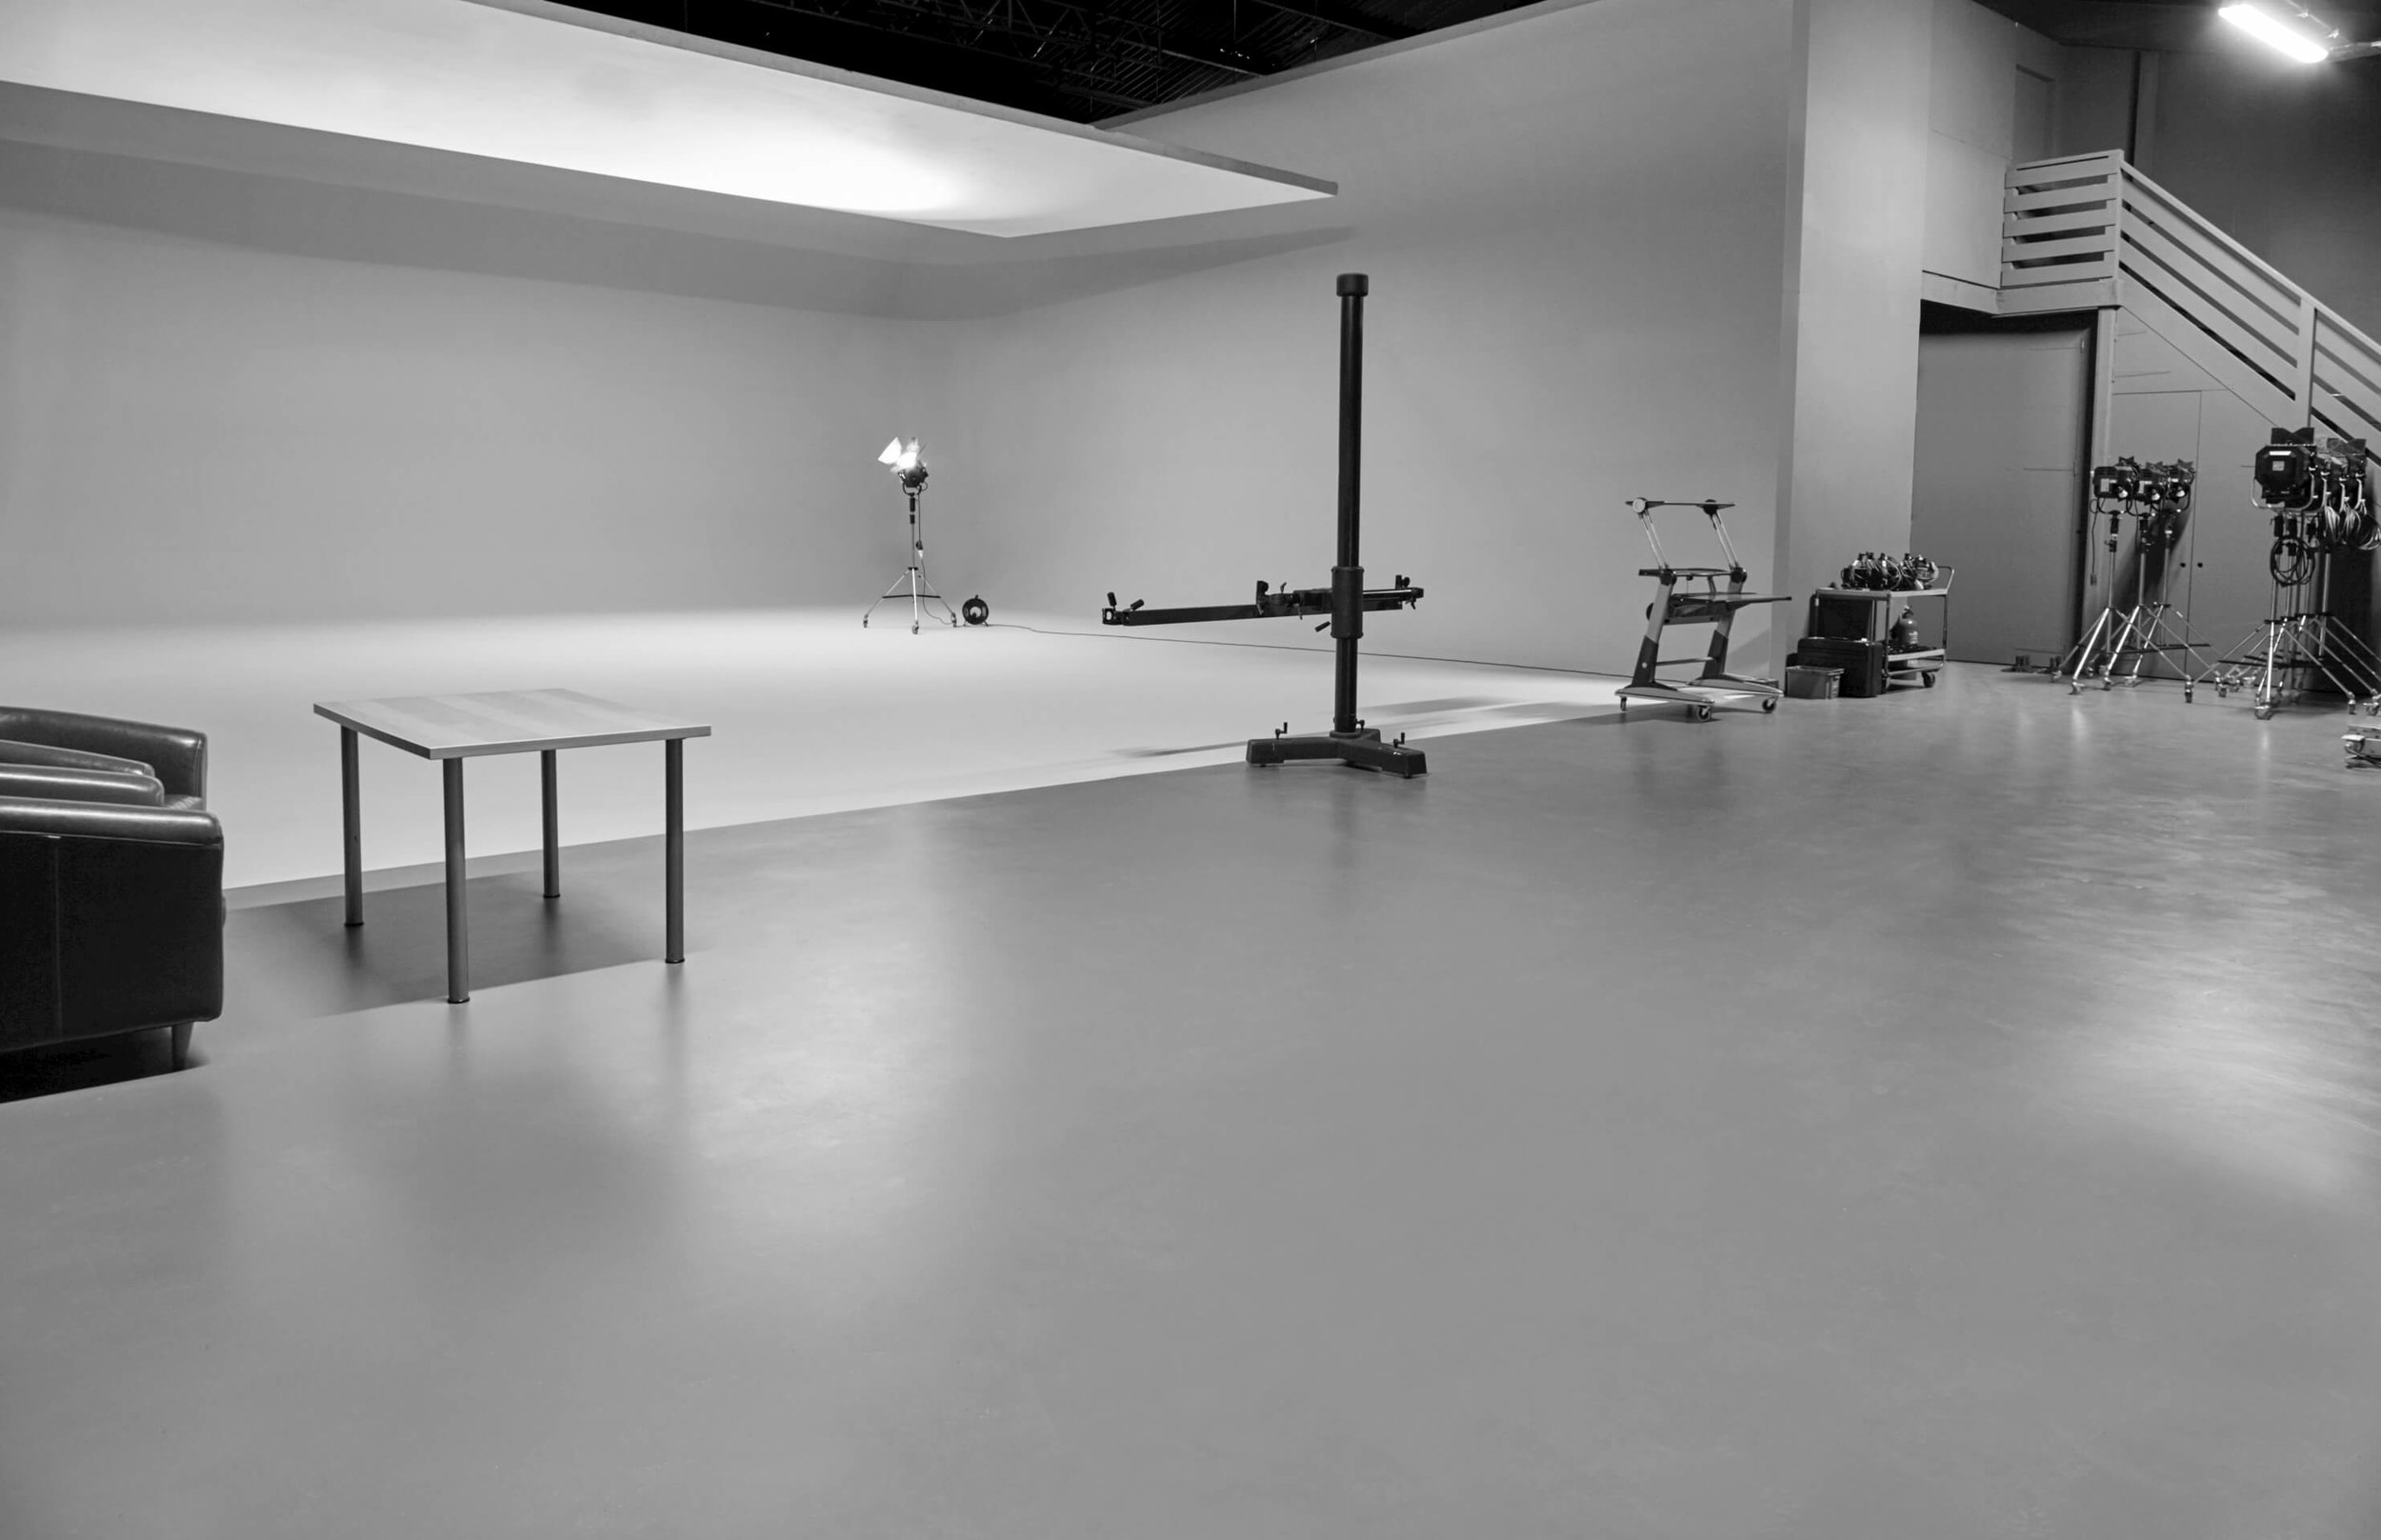 Studio-1-one-moorland-studios-large-photography-space-uk-midlands-infinity-cove-ready-for-hire.jpg